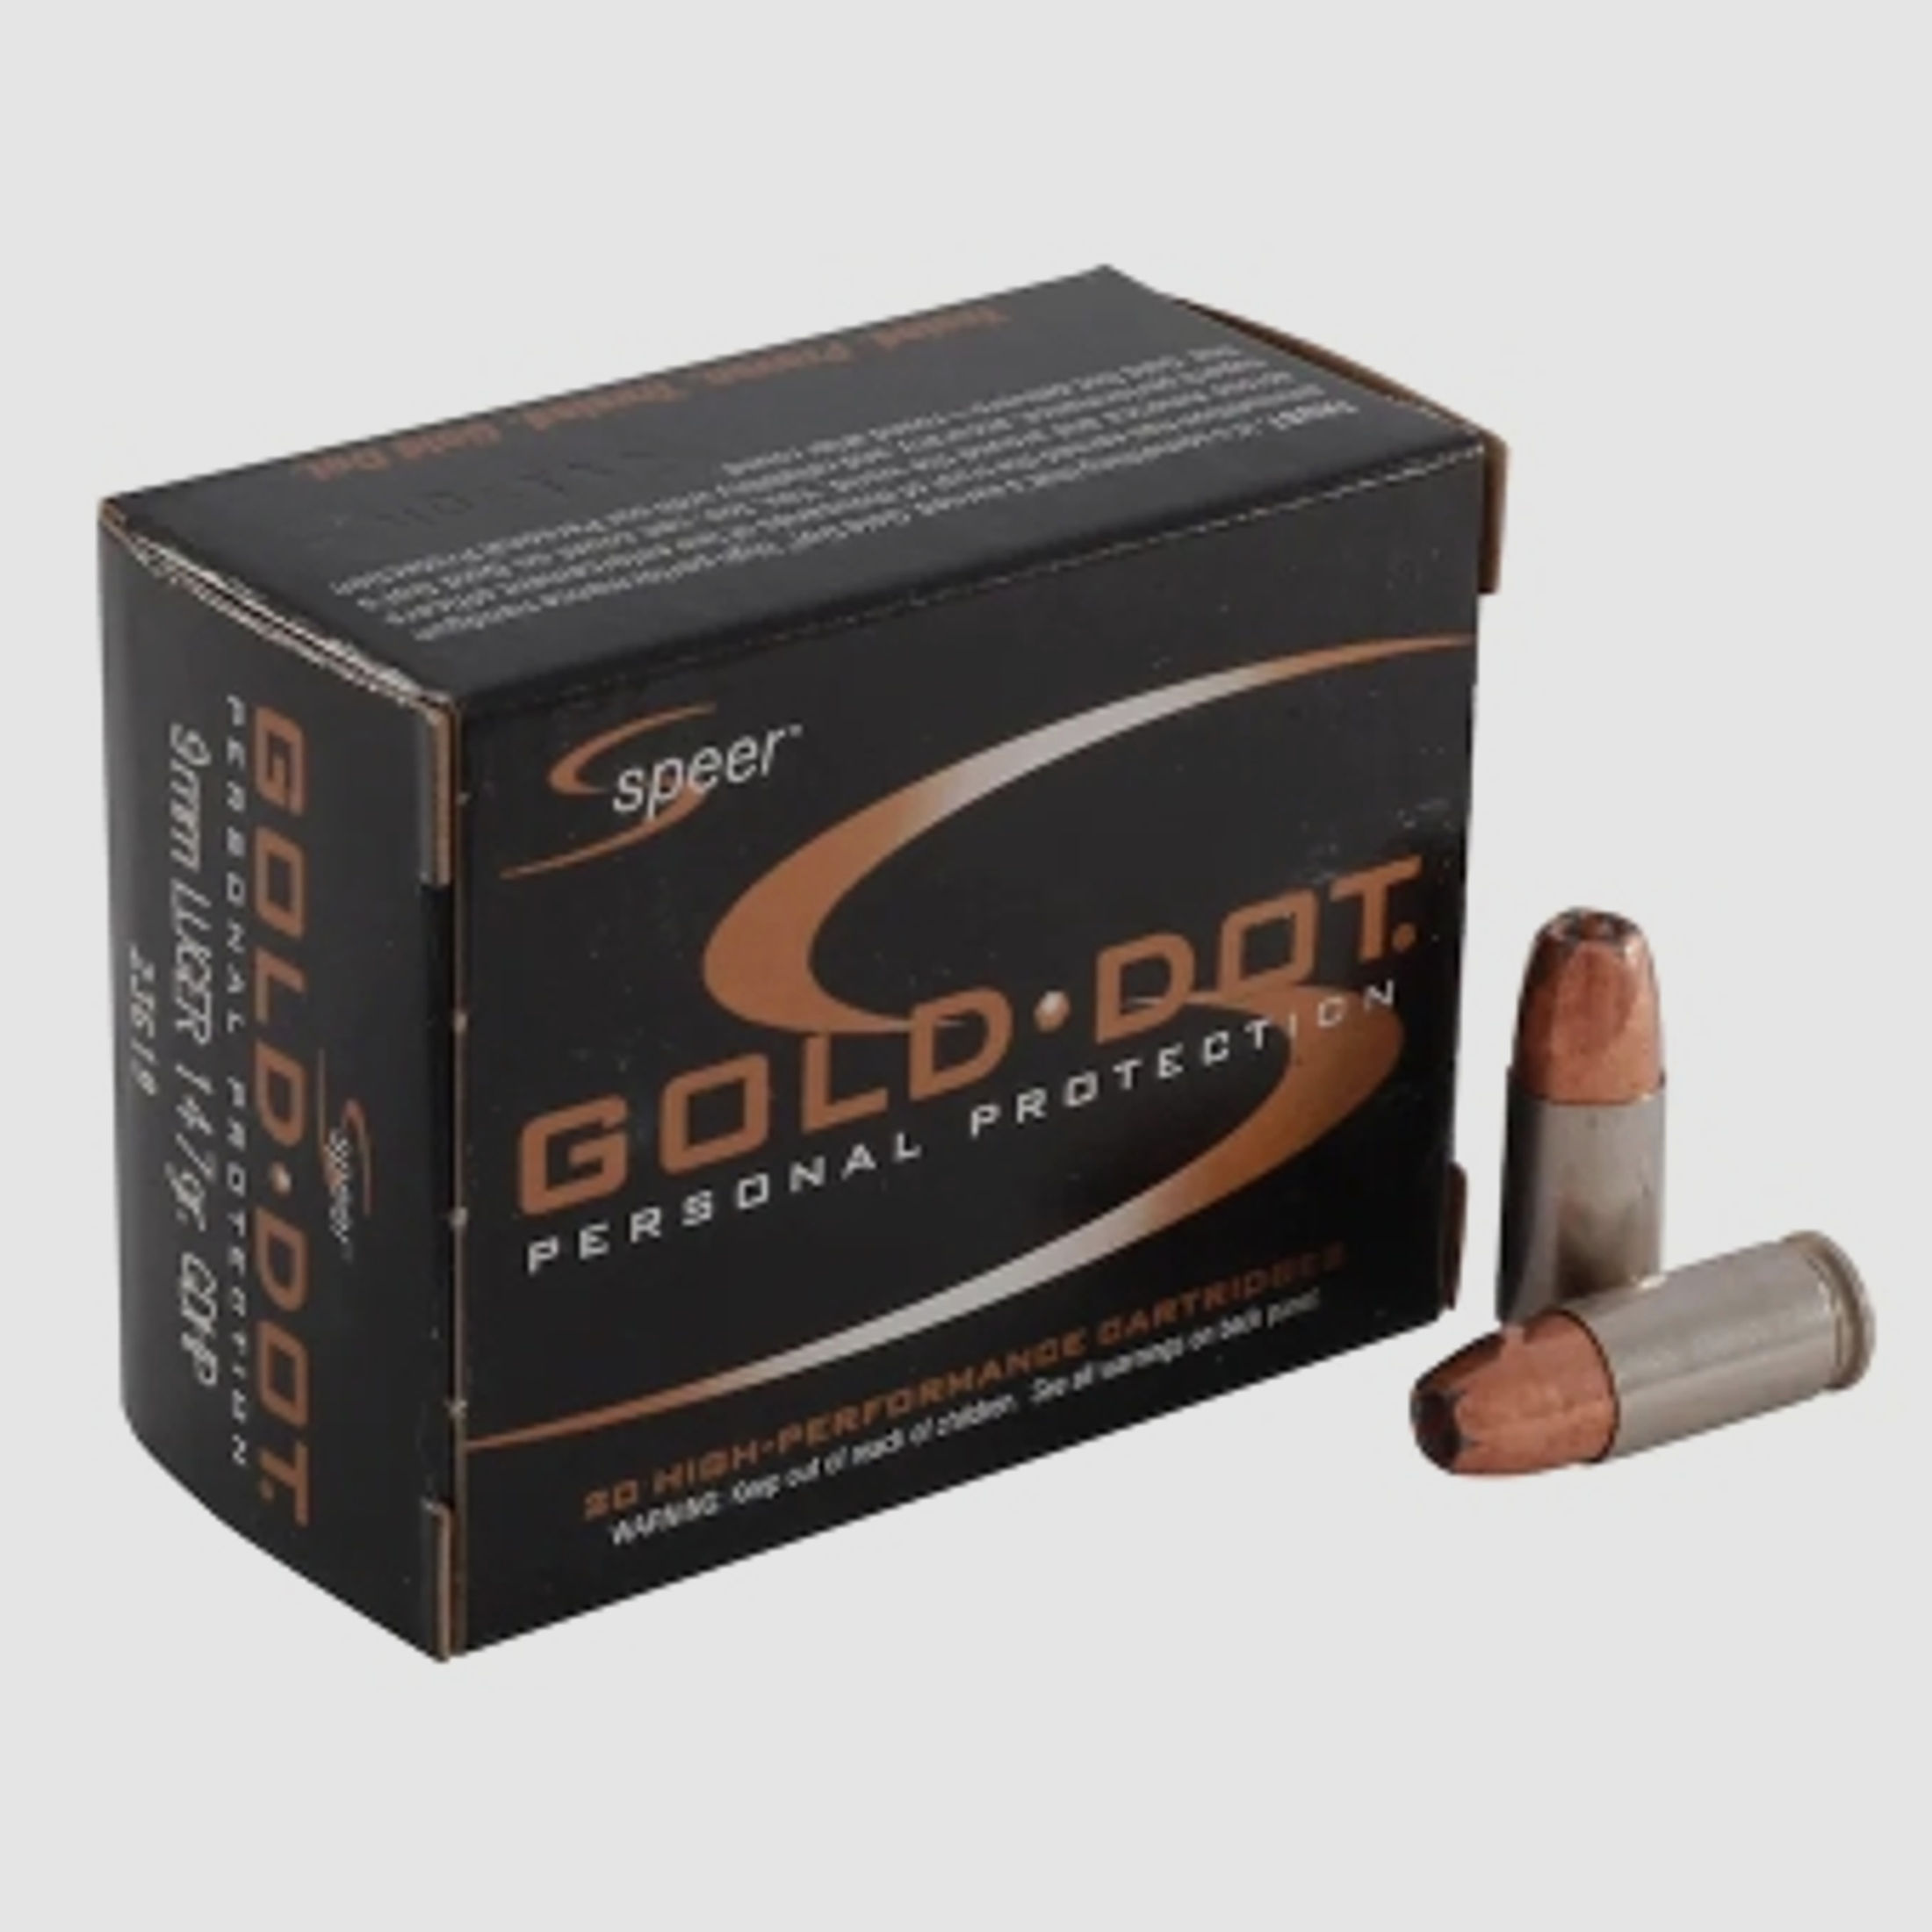 Speer Gold Dot Personal Protection 9mm Luger 147GR GDHP 20 Patronen